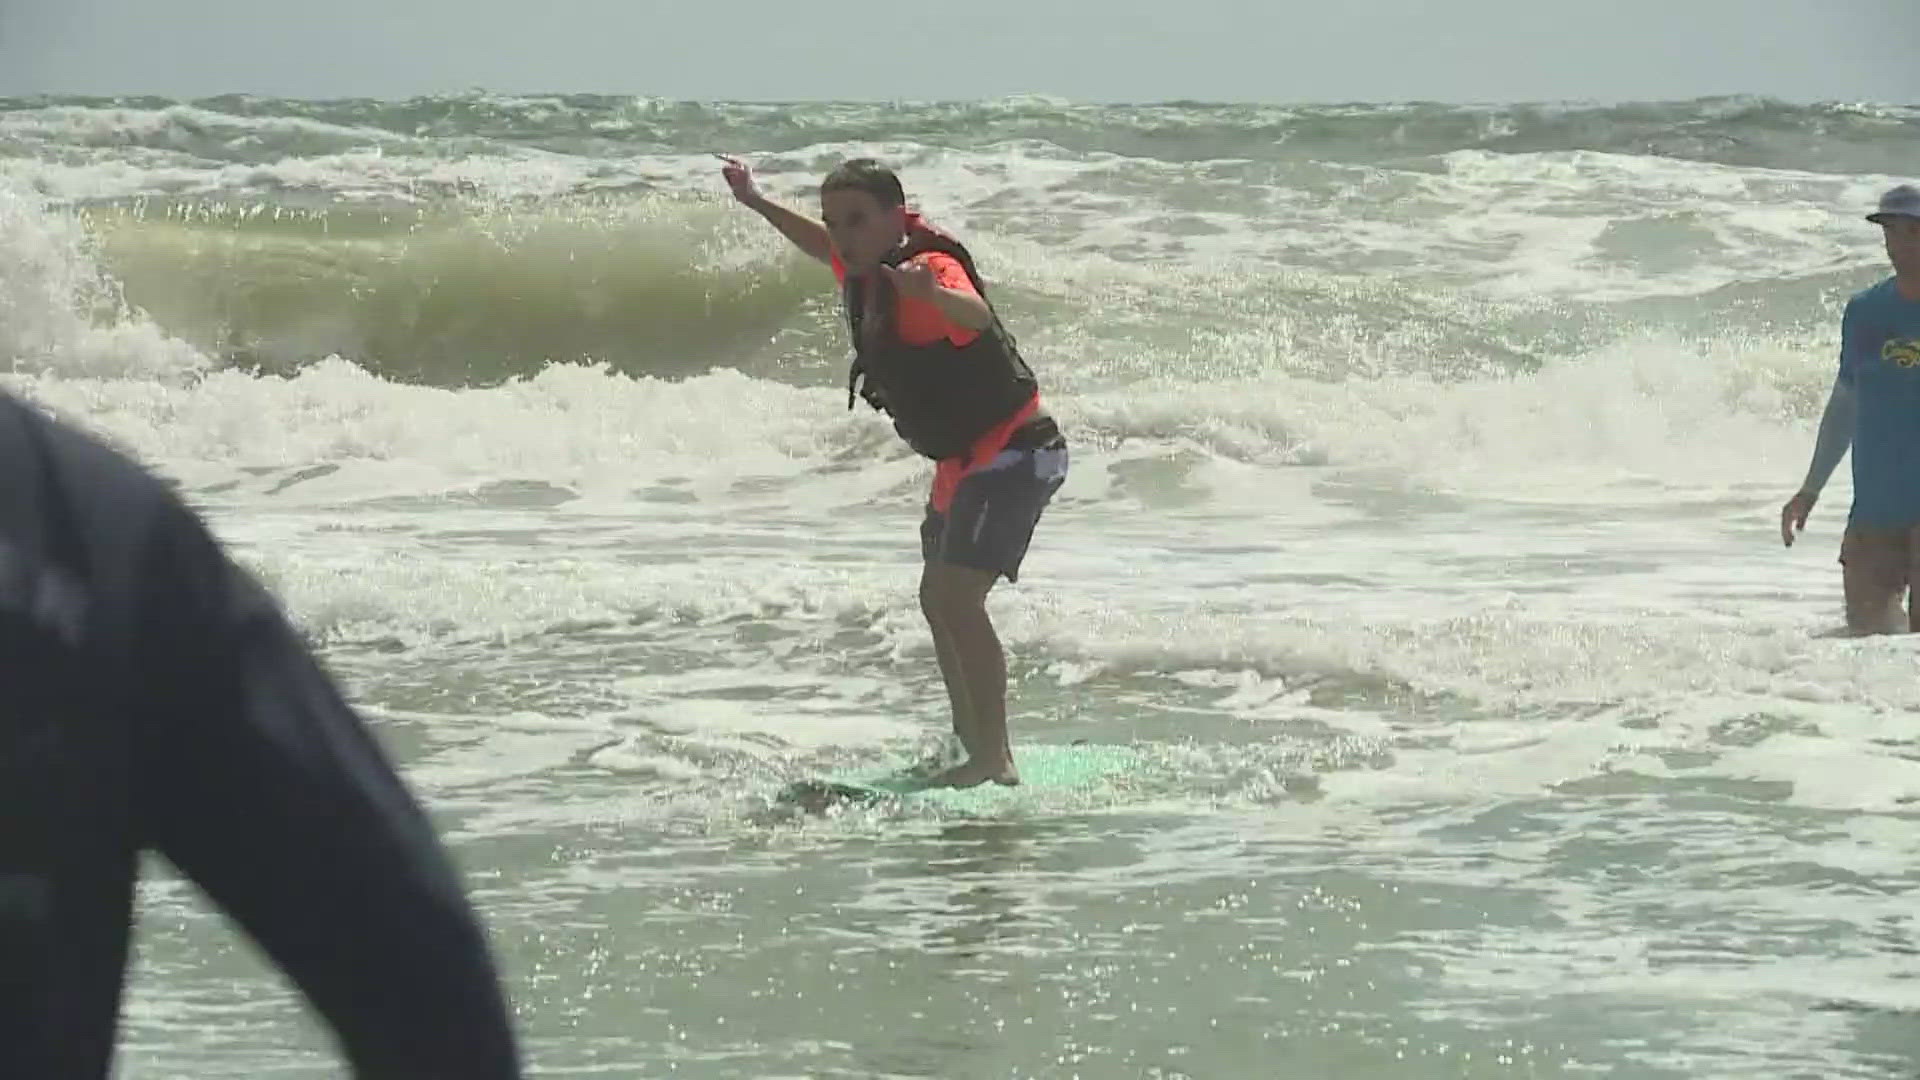 HEAL (Helping Enrich Autistic Lives) held its annual surf camp for kids and young adults with autism Wednesday,  despite strong winds and rough waves.